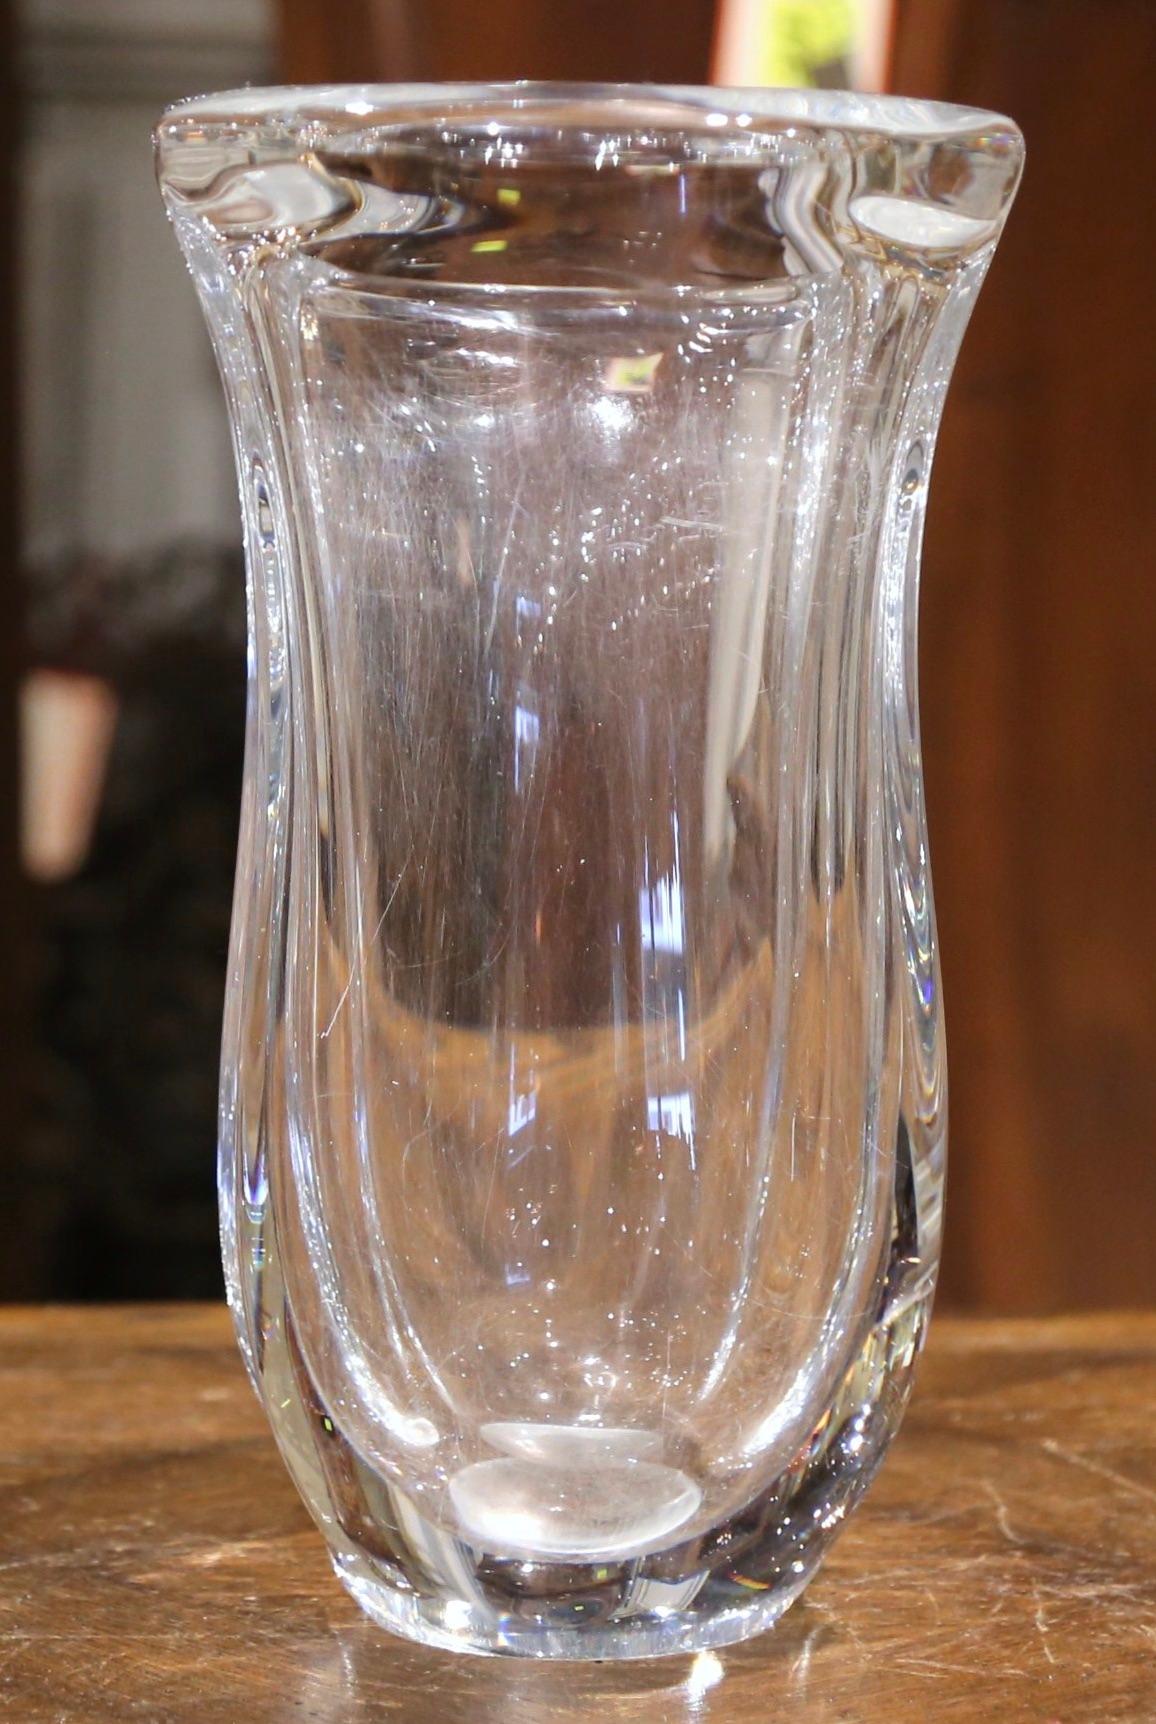 Decorate a table in your breakfast nook or entry way by filling this elegant, vintage vase with a bouquet of fresh flowers. Crafted in France, circa 1950, the tall, Art Deco glass vase is hand blown for a unique, organic shape with a wide oval mouth